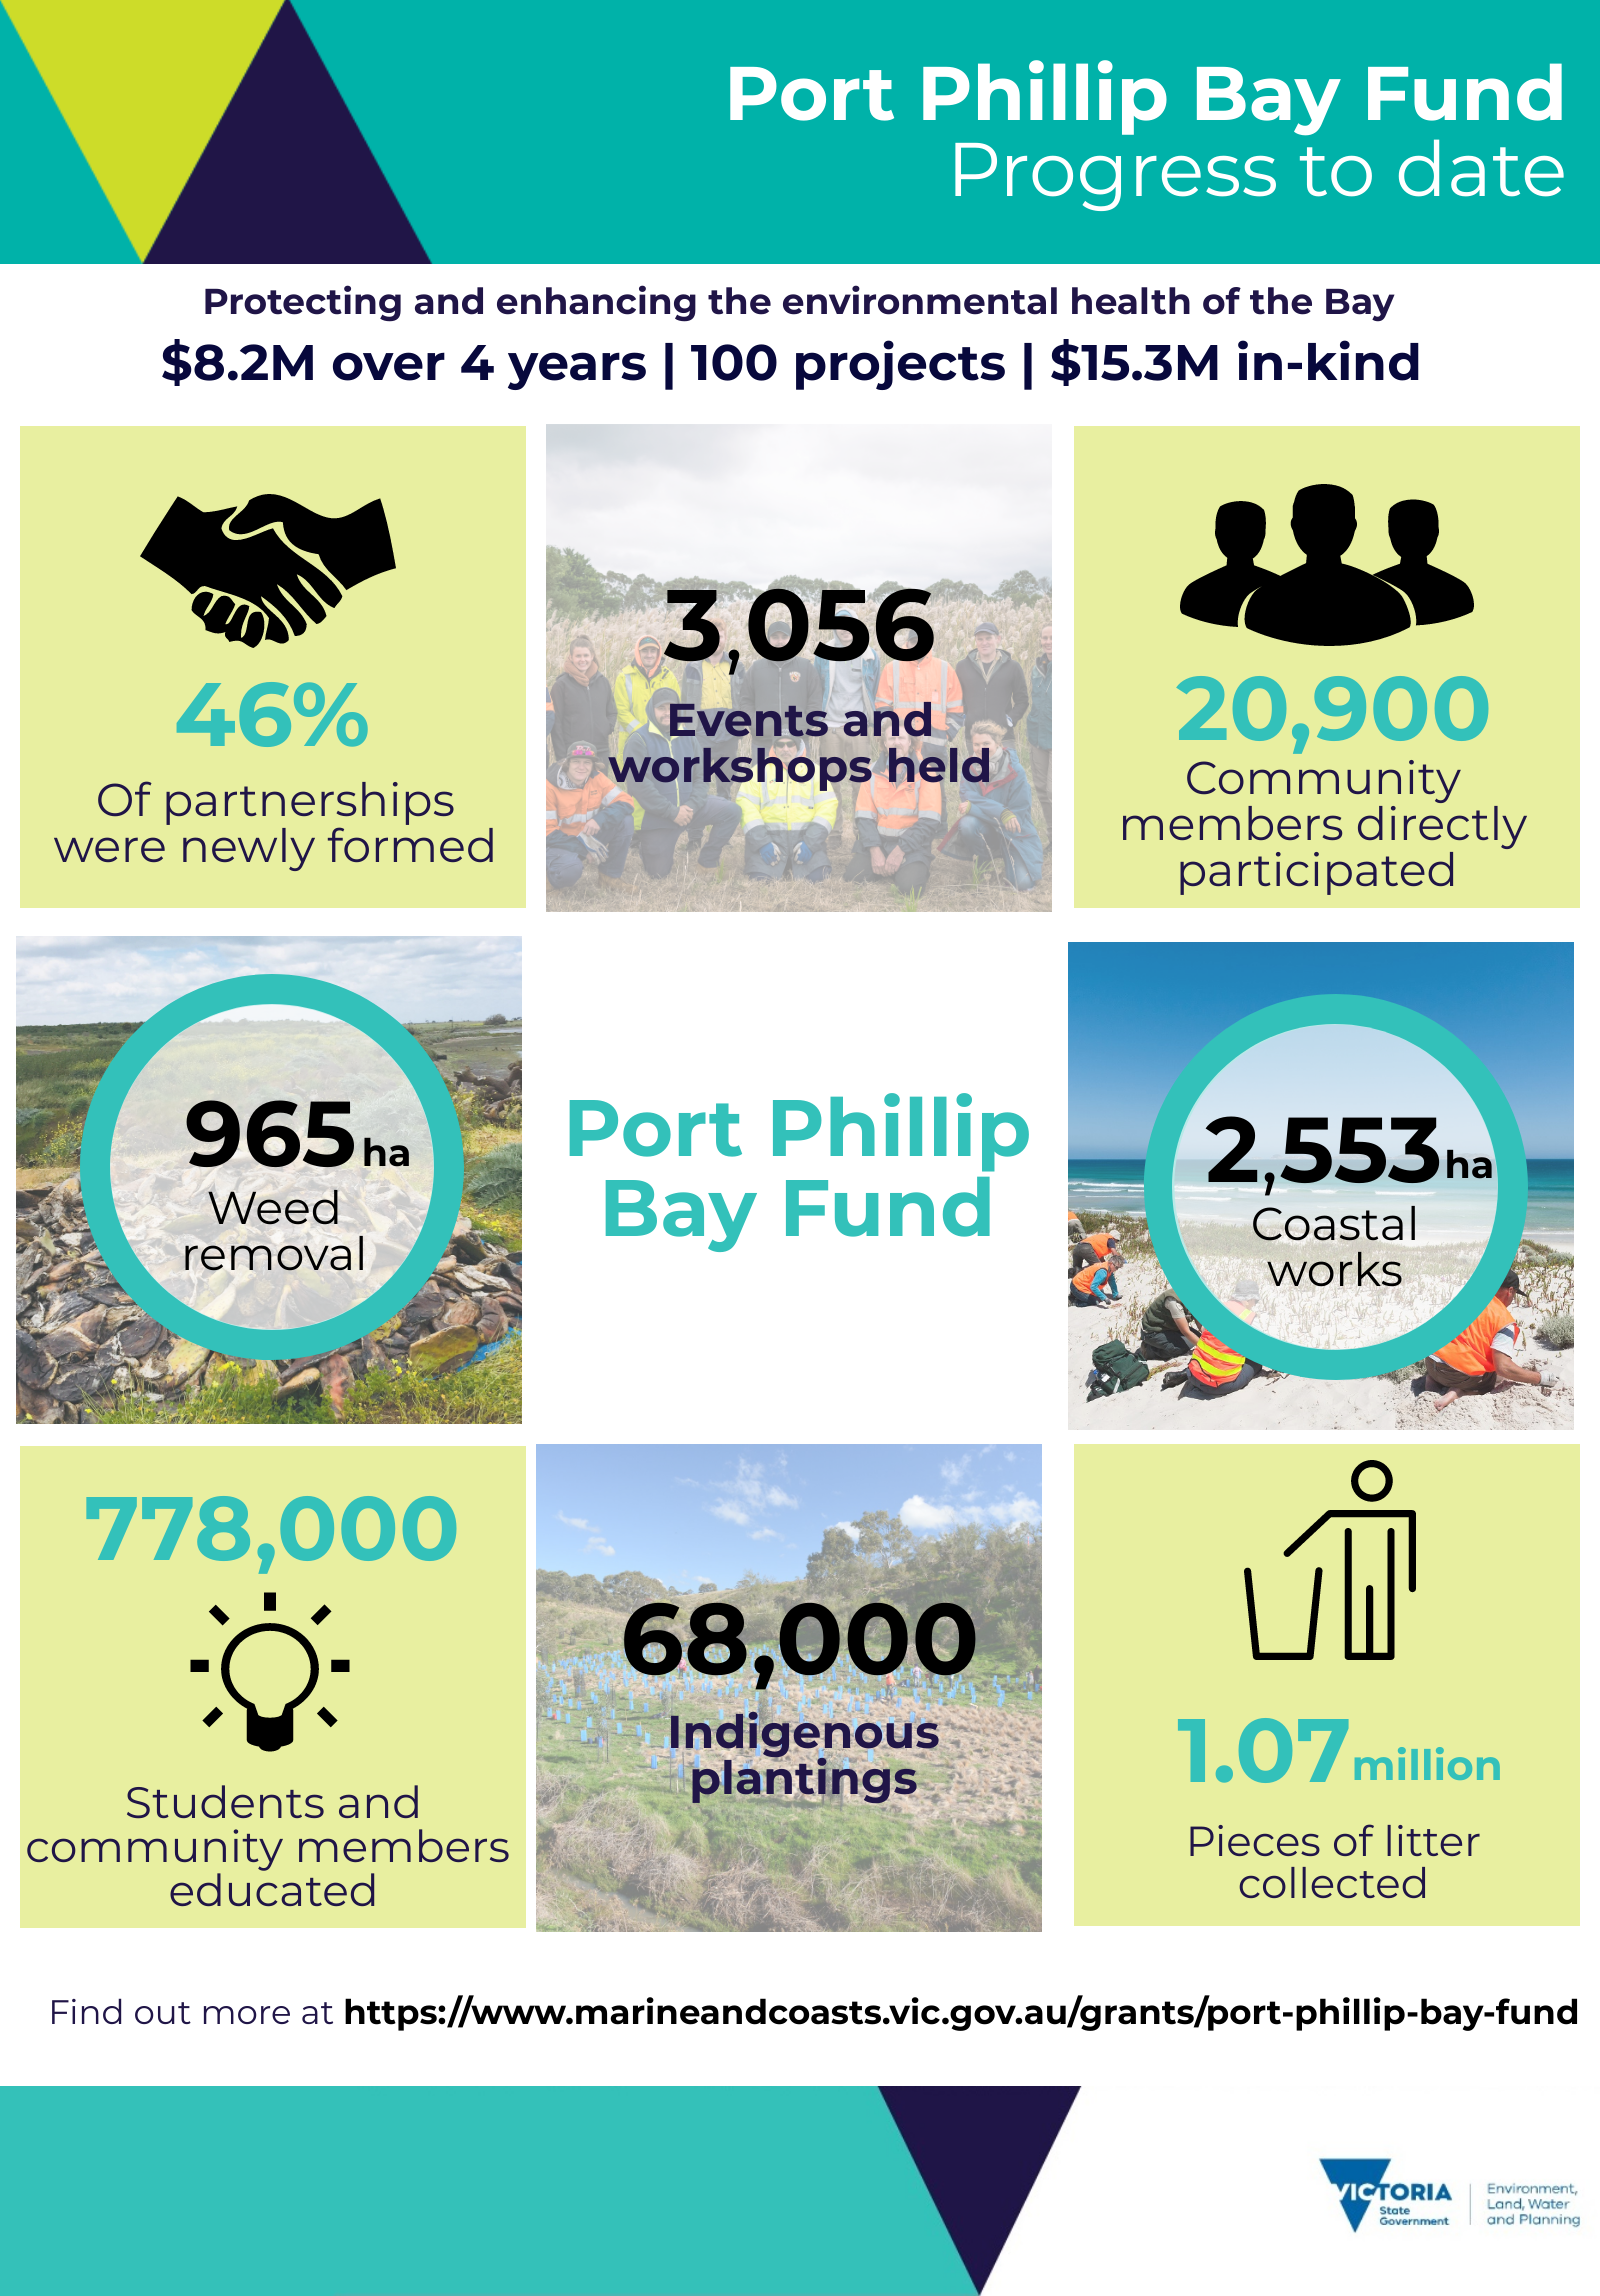 Port Phillip Bay Fund Round 1-3 Infographic demonstrating program progress as of June 2021. Progress highlights are: $8.2 million of funding over 4 years, 100 projects, $15.3 million in-kind, 46% of partnerships were newly formed, 3056 events and workshops held, 20,900 community members directly participated, 965 hectares weed removal, 2553 hectares coastal works, 778,000 students and community members educated, 68,000 indigenous plantings, and 1.07 million pieces of litter collected.